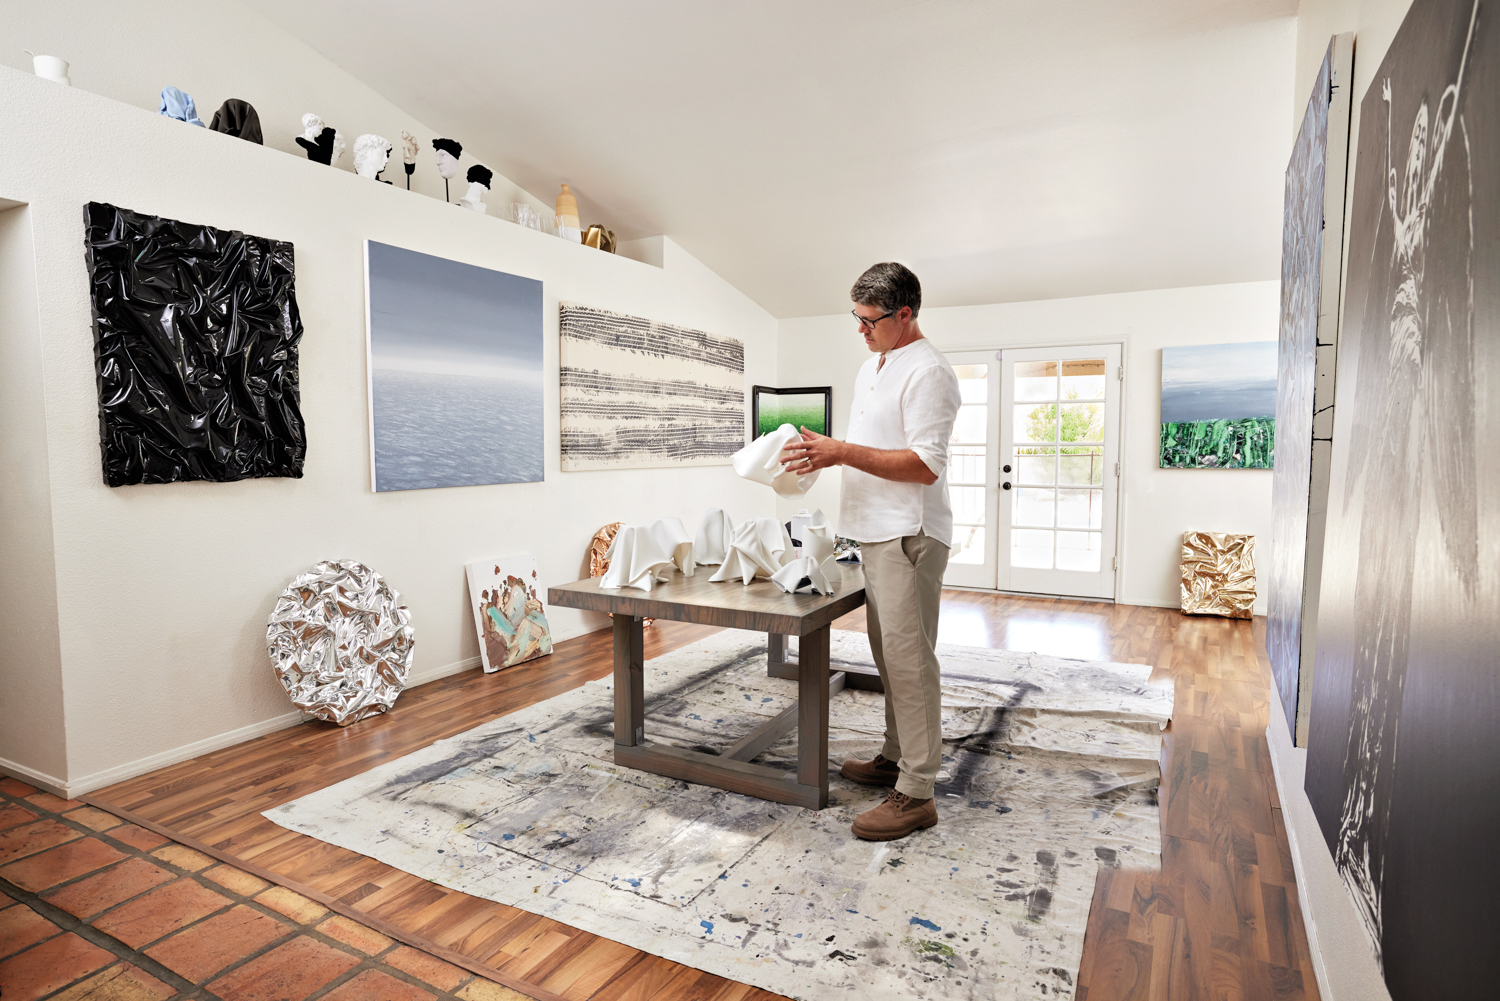 Jason Adkins stands in his studio holding a white sculpture and surrounded by artwork